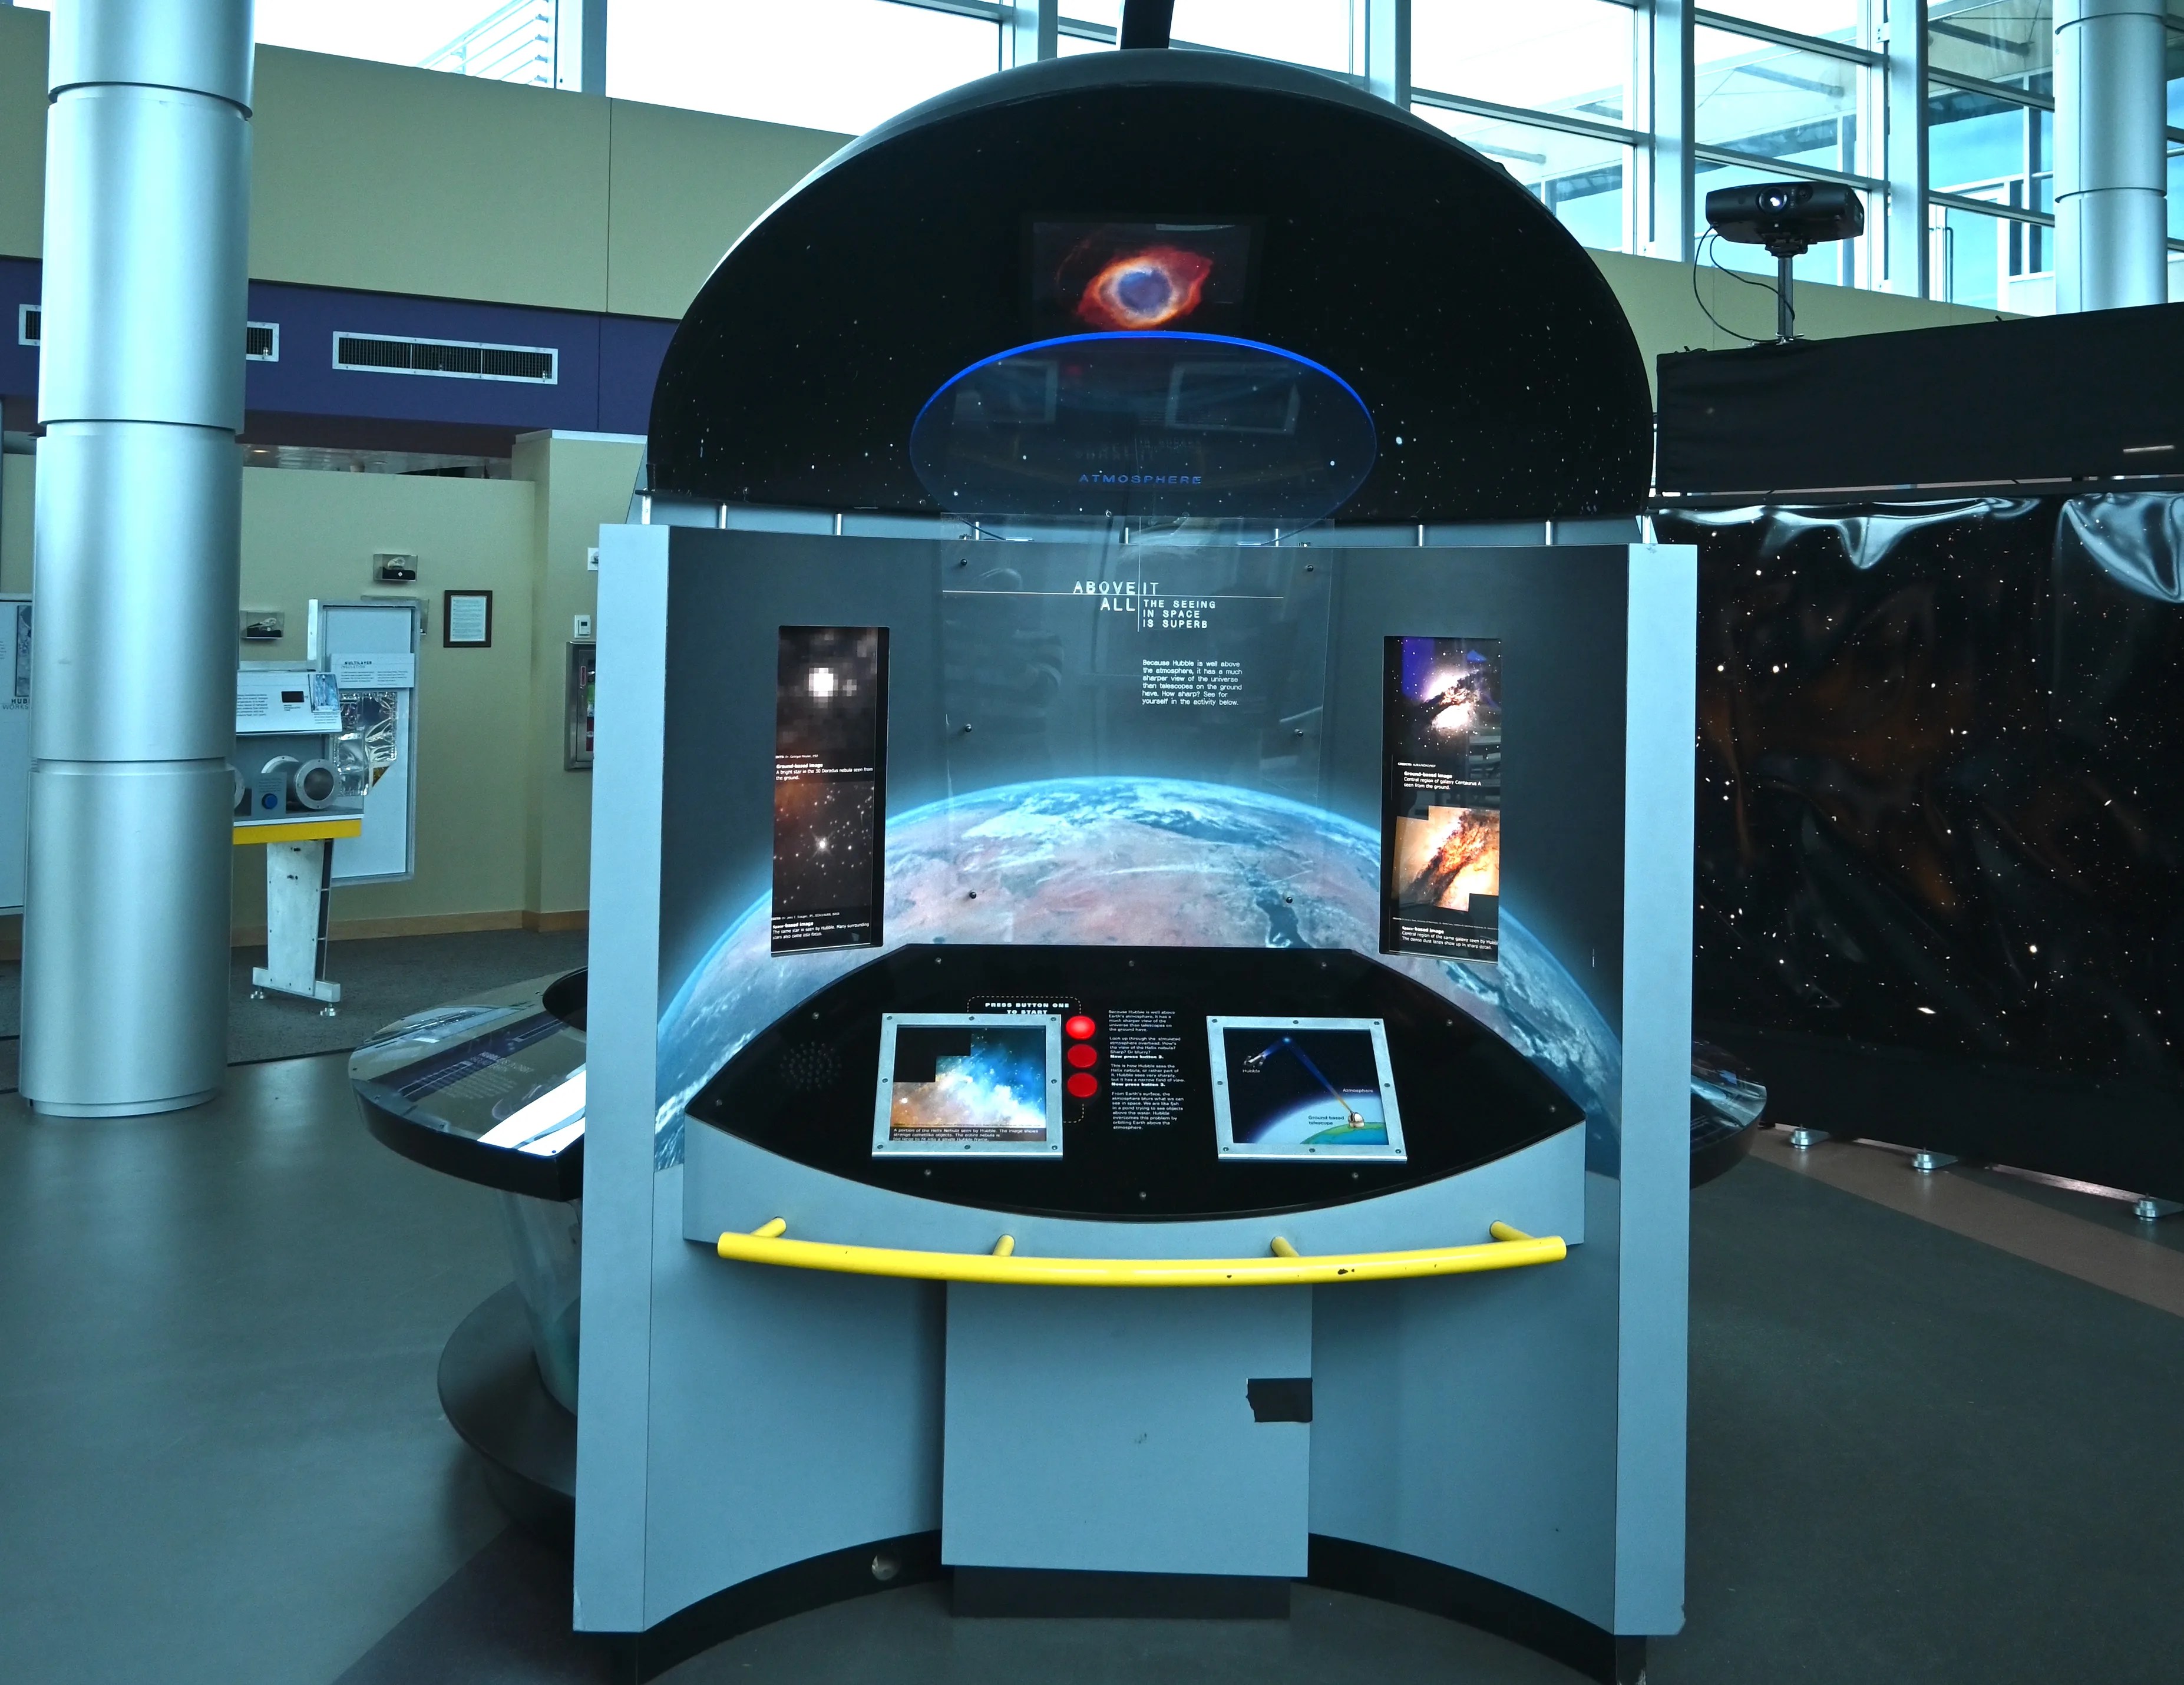 The backside of the HST traveling exhibit is shown that explains why scientists want a telescope above the blurring affects of Earth's atmosphere.